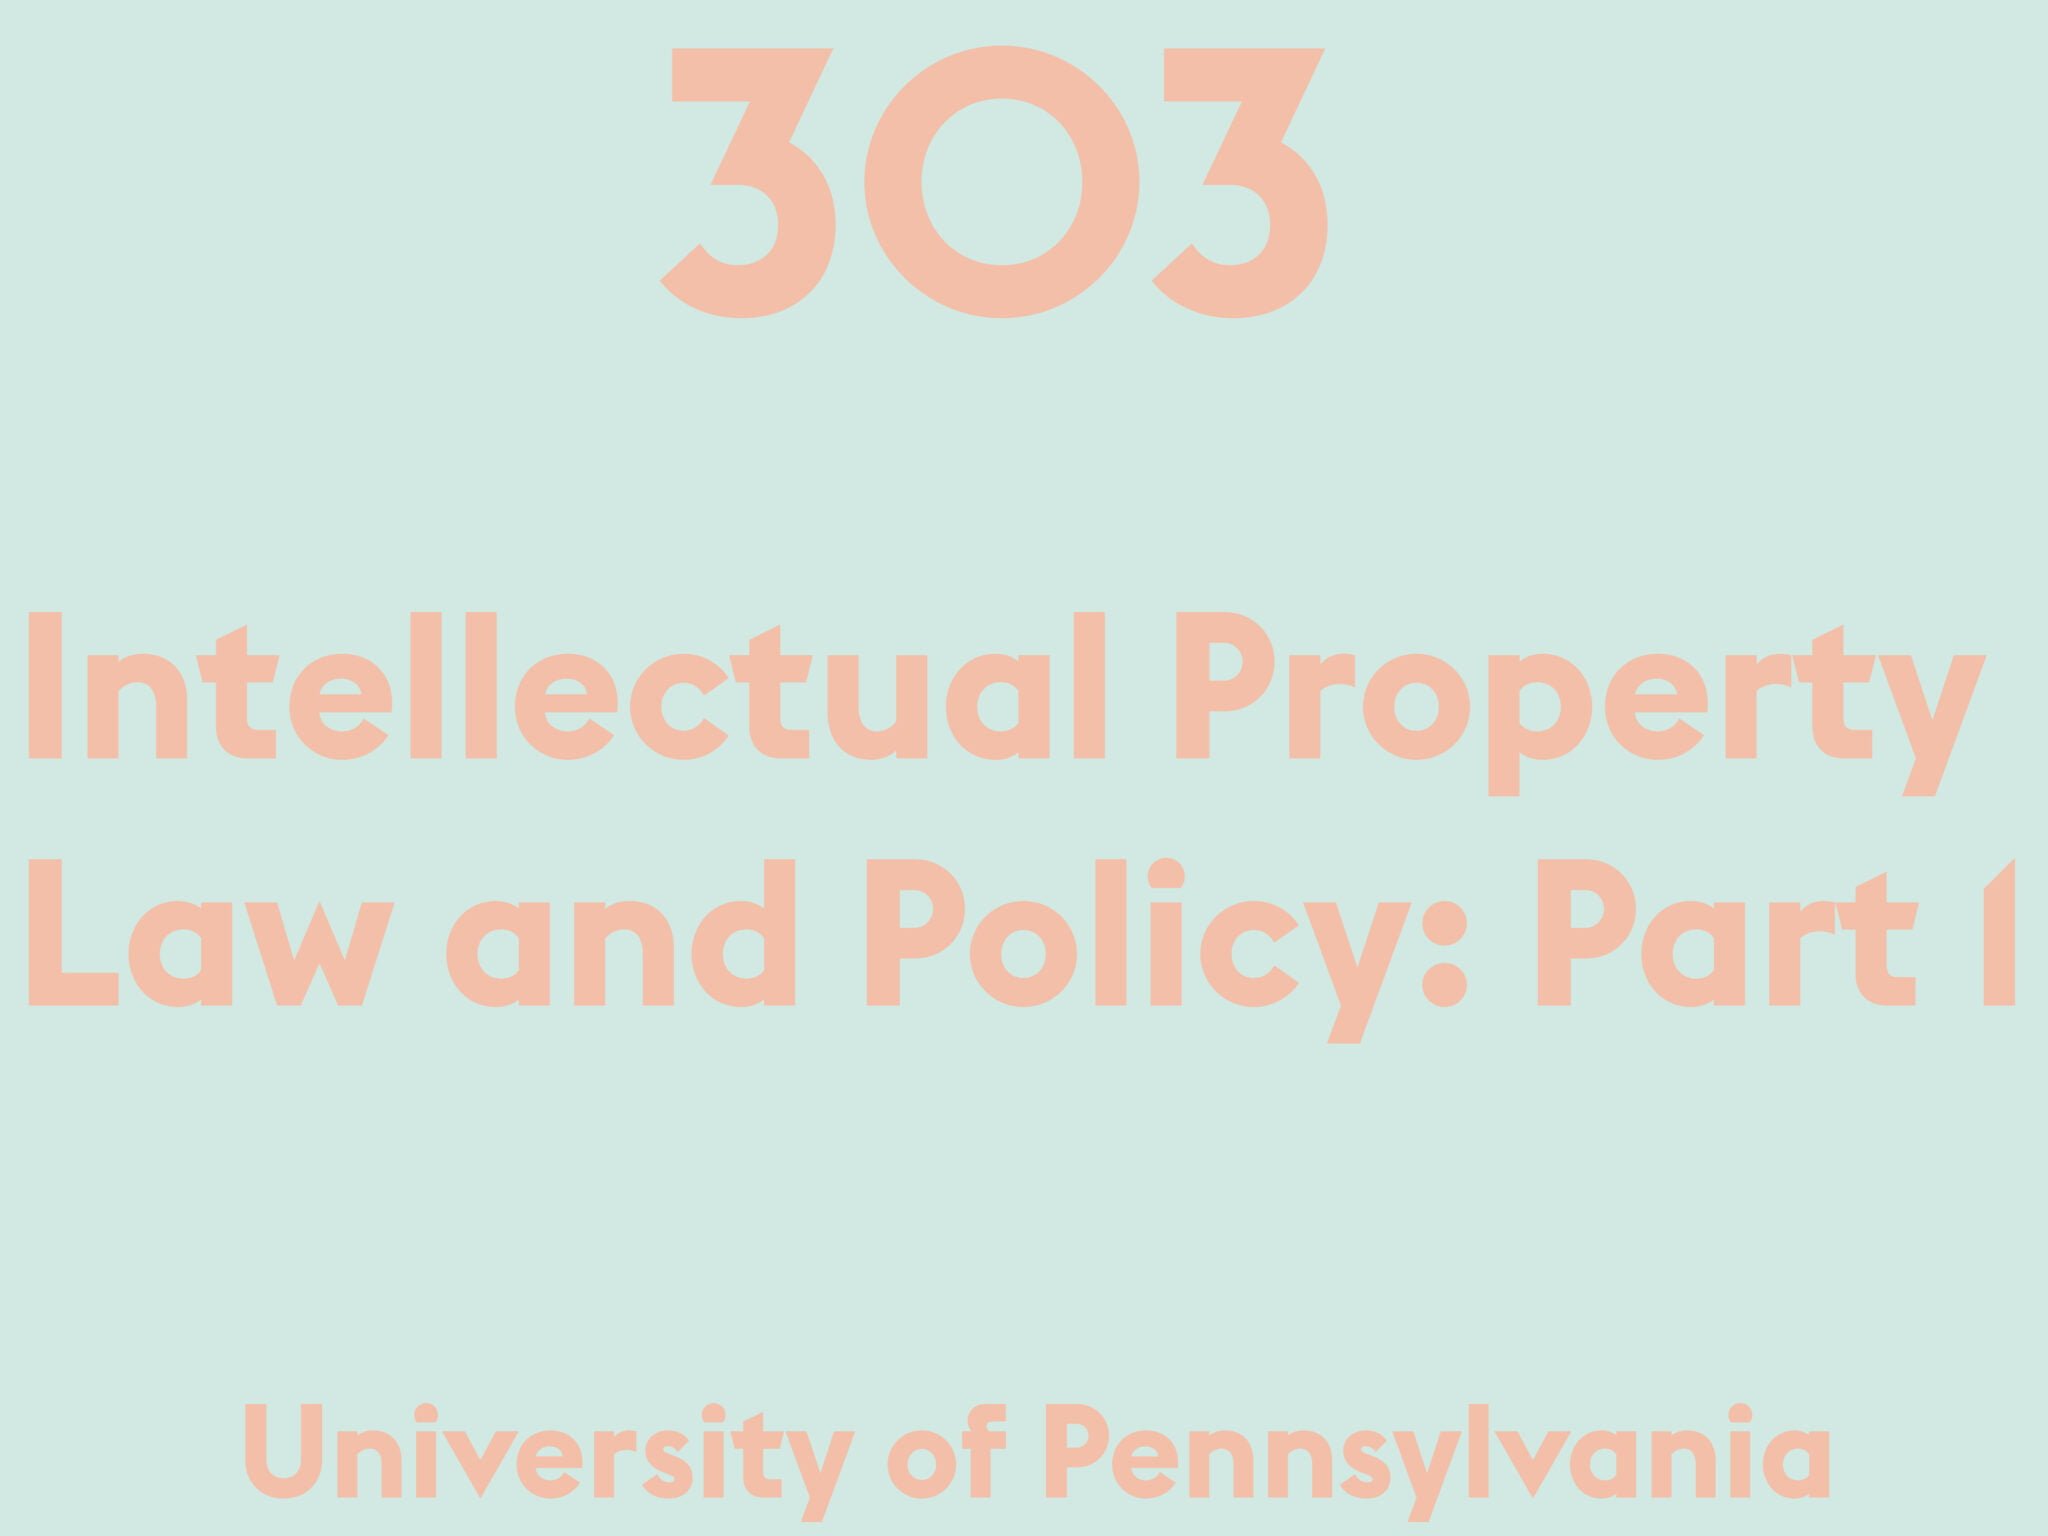 Intellectual Property Law and Policy: Part 1